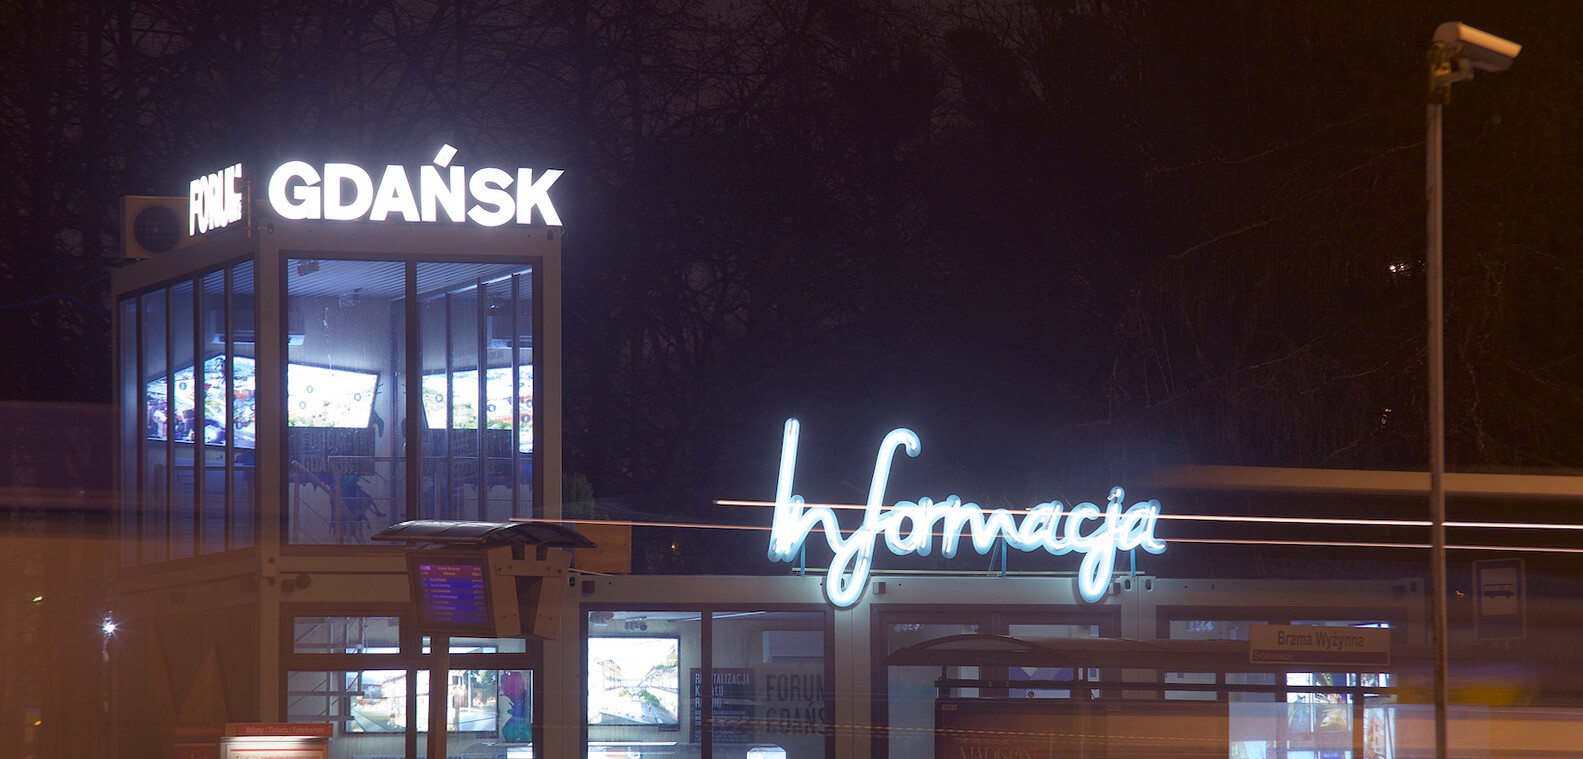 Forum Gdańsk information - Danzig Forum - information signage made of neon signs, mounted on a rack, located above the entrance